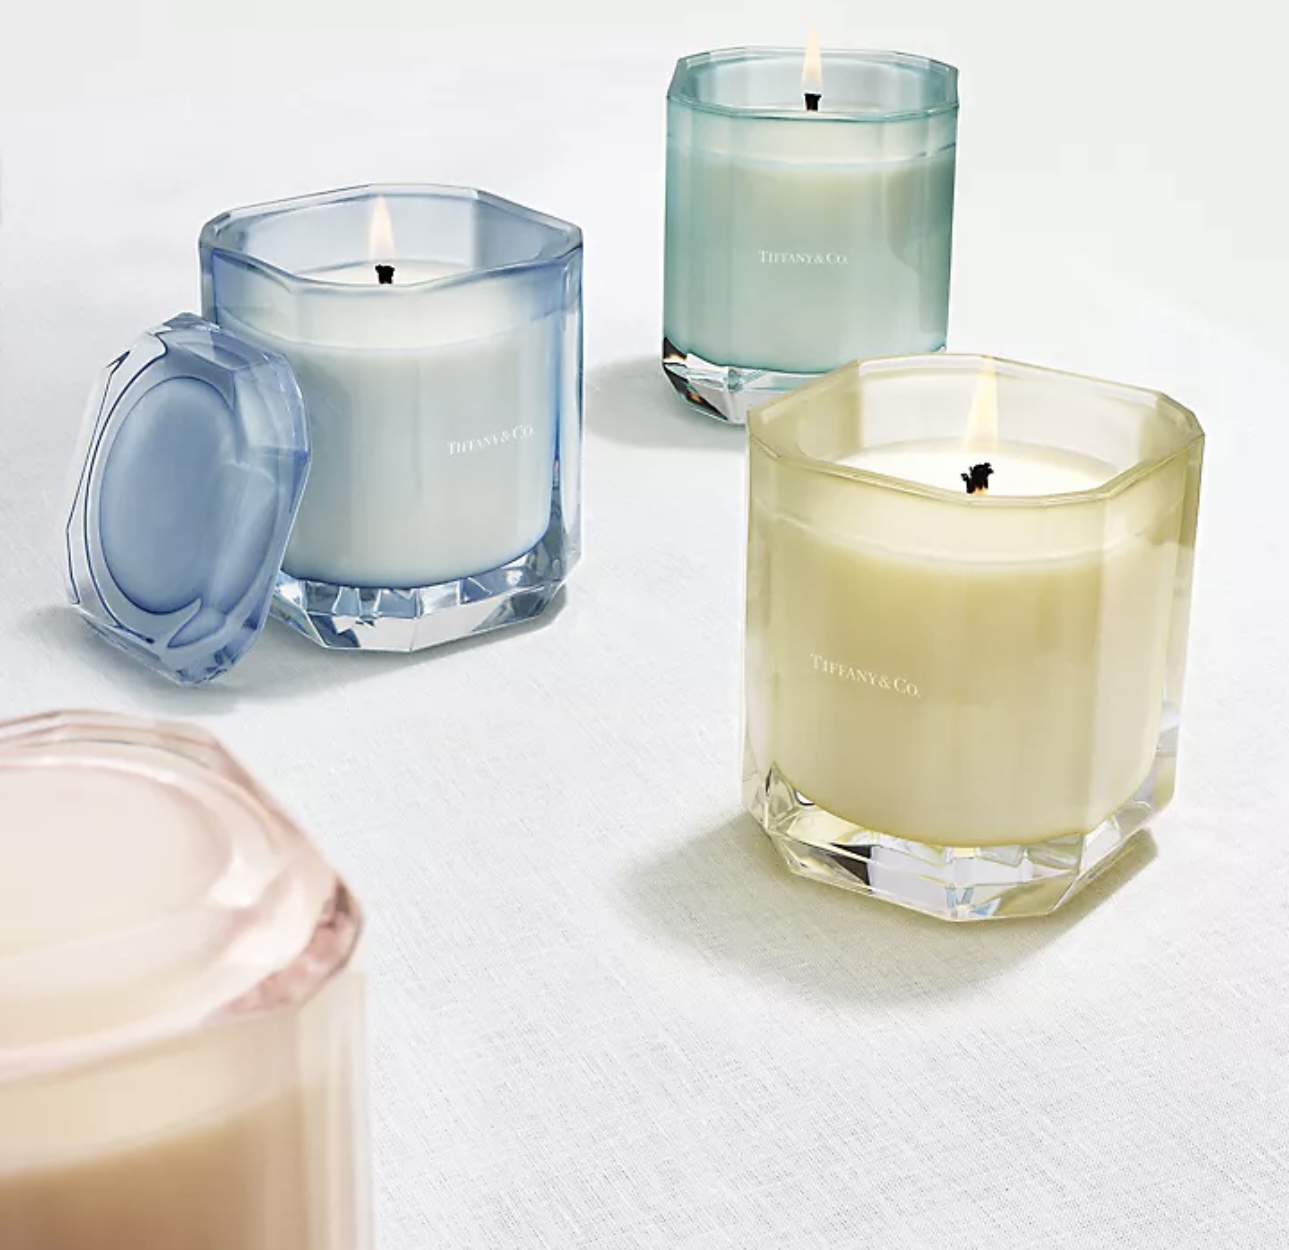 Several candles in coloured glass containers from Tiffany & Co. Holt Renfrew